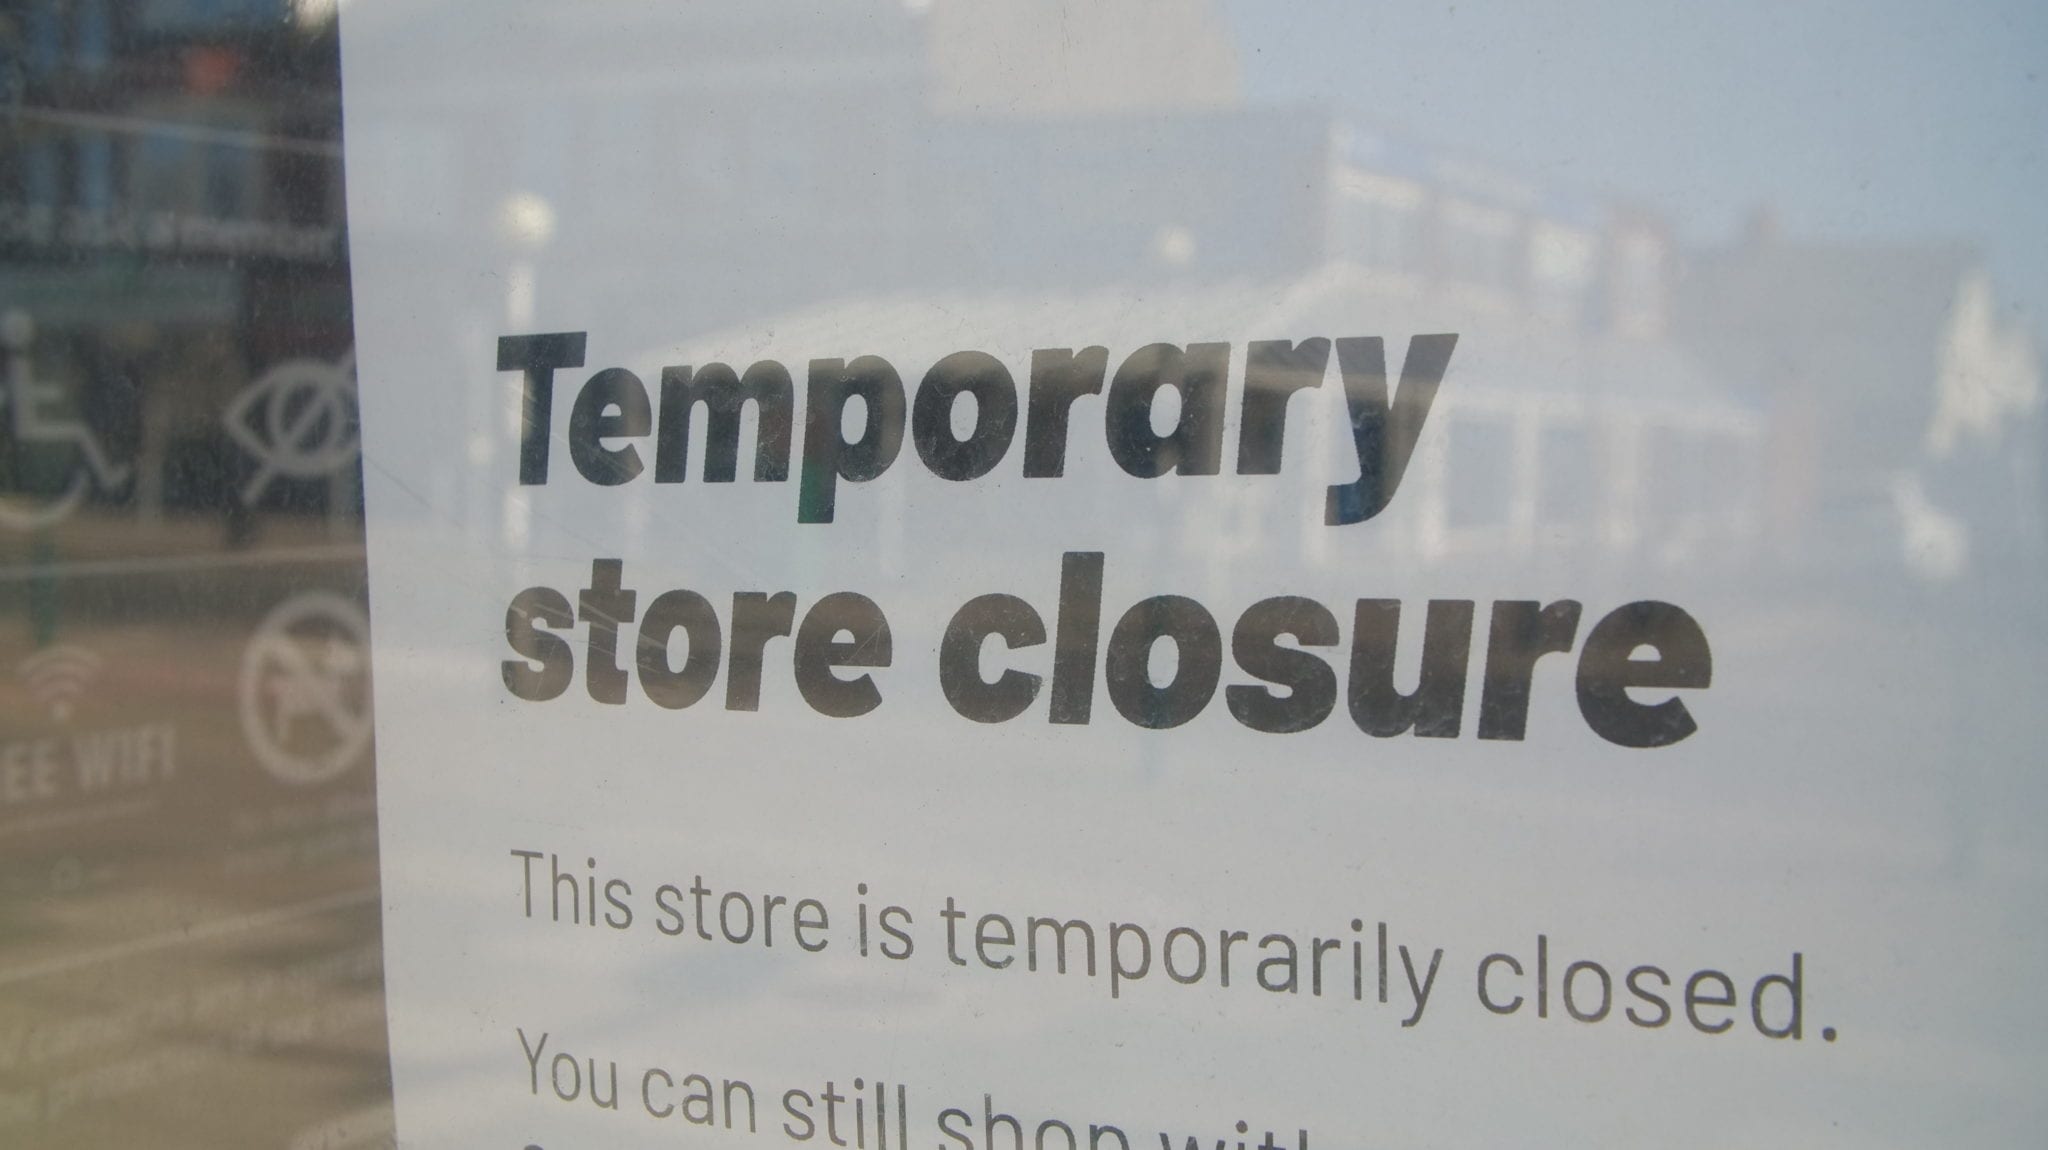 Independent shop closed until further notice in window due to the COVID 19 coronavirus pandemic, bars, cafes, restaurants, clubs all shut cause of this international crisis